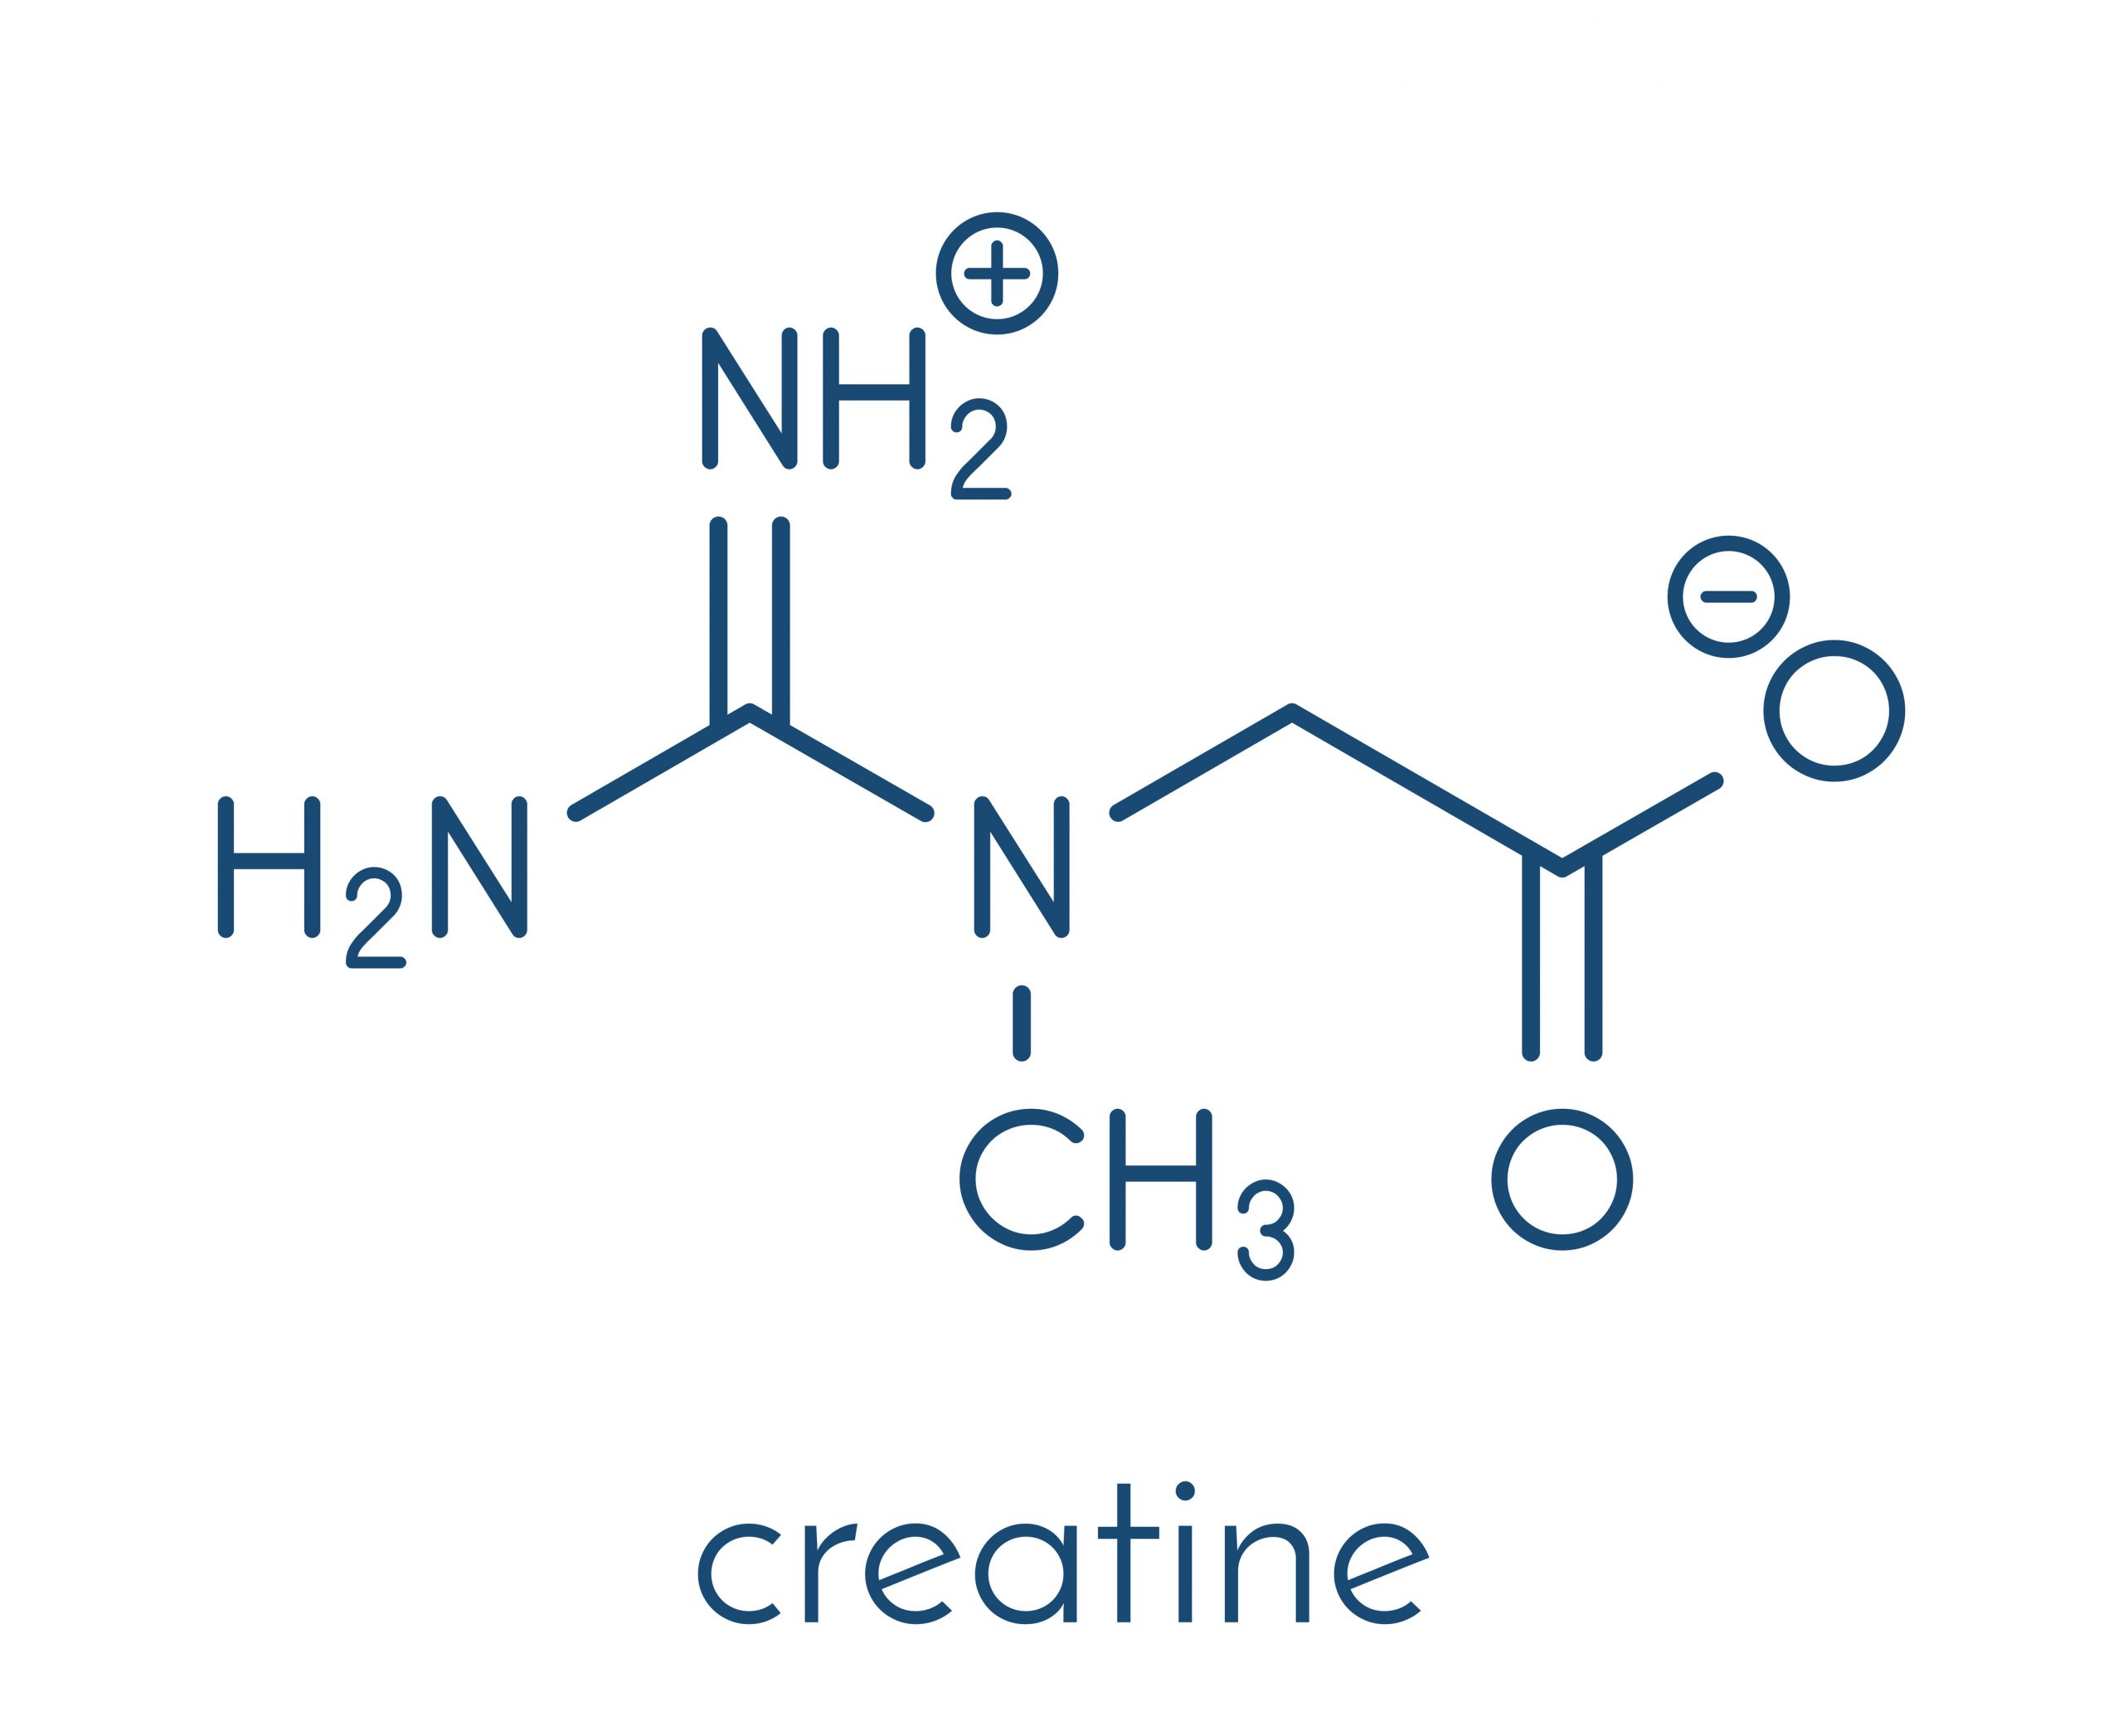 Image showing the chemical structure of creatine